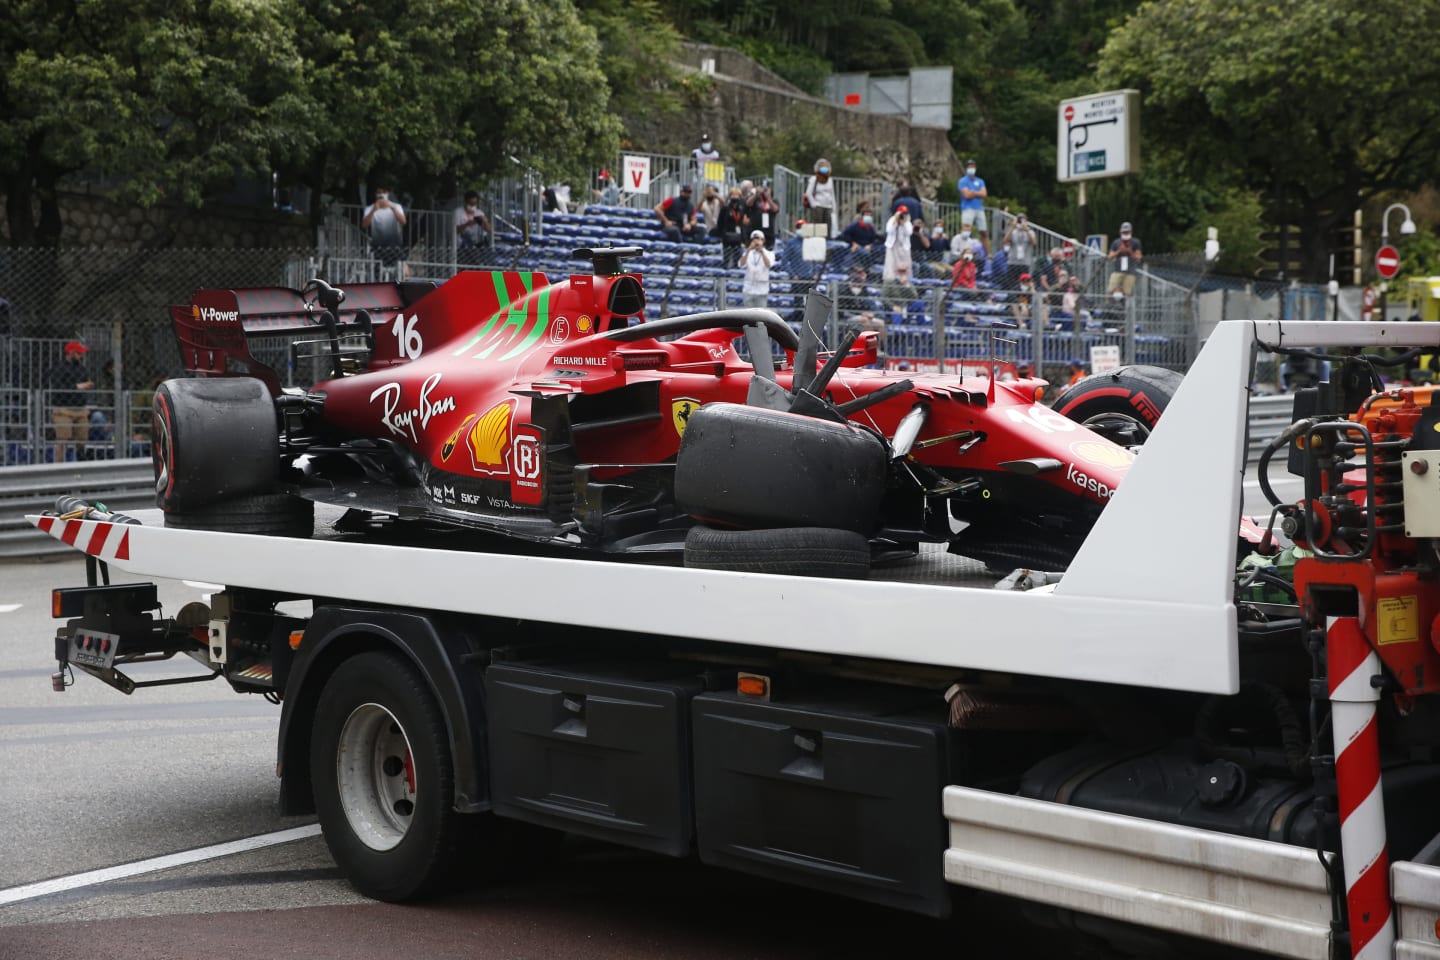 MONTE-CARLO, MONACO - MAY 22: The car of Charles Leclerc of Monaco and Ferrari is seen on the back of a recovery truck after crashing on track during qualifying prior to the F1 Grand Prix of Monaco at Circuit de Monaco on May 22, 2021 in Monte-Carlo, Monaco. (Photo by Sebastien Nogier - Pool/Getty Images)